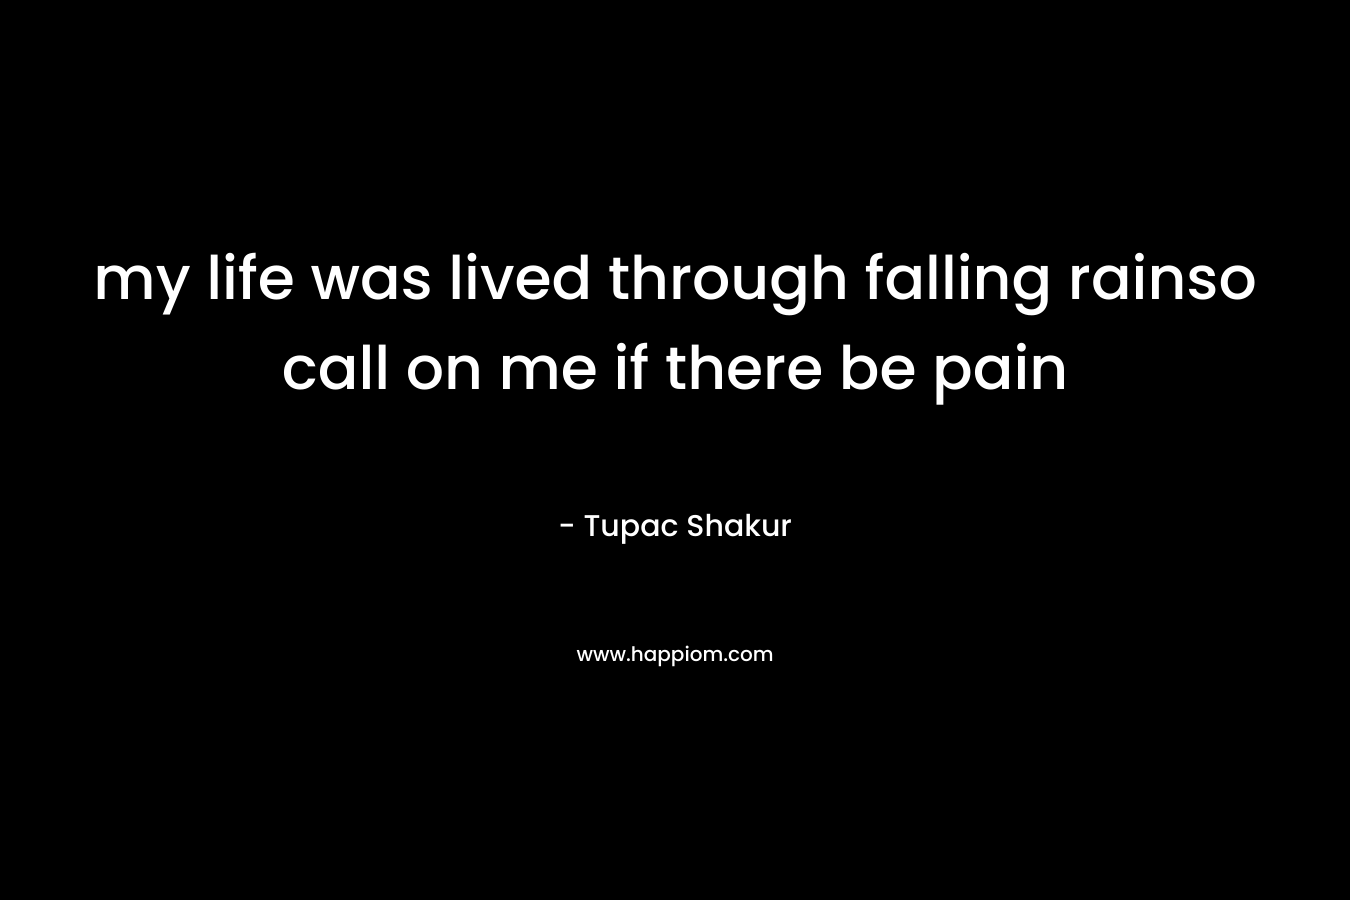 my life was lived through falling rainso call on me if there be pain – Tupac Shakur